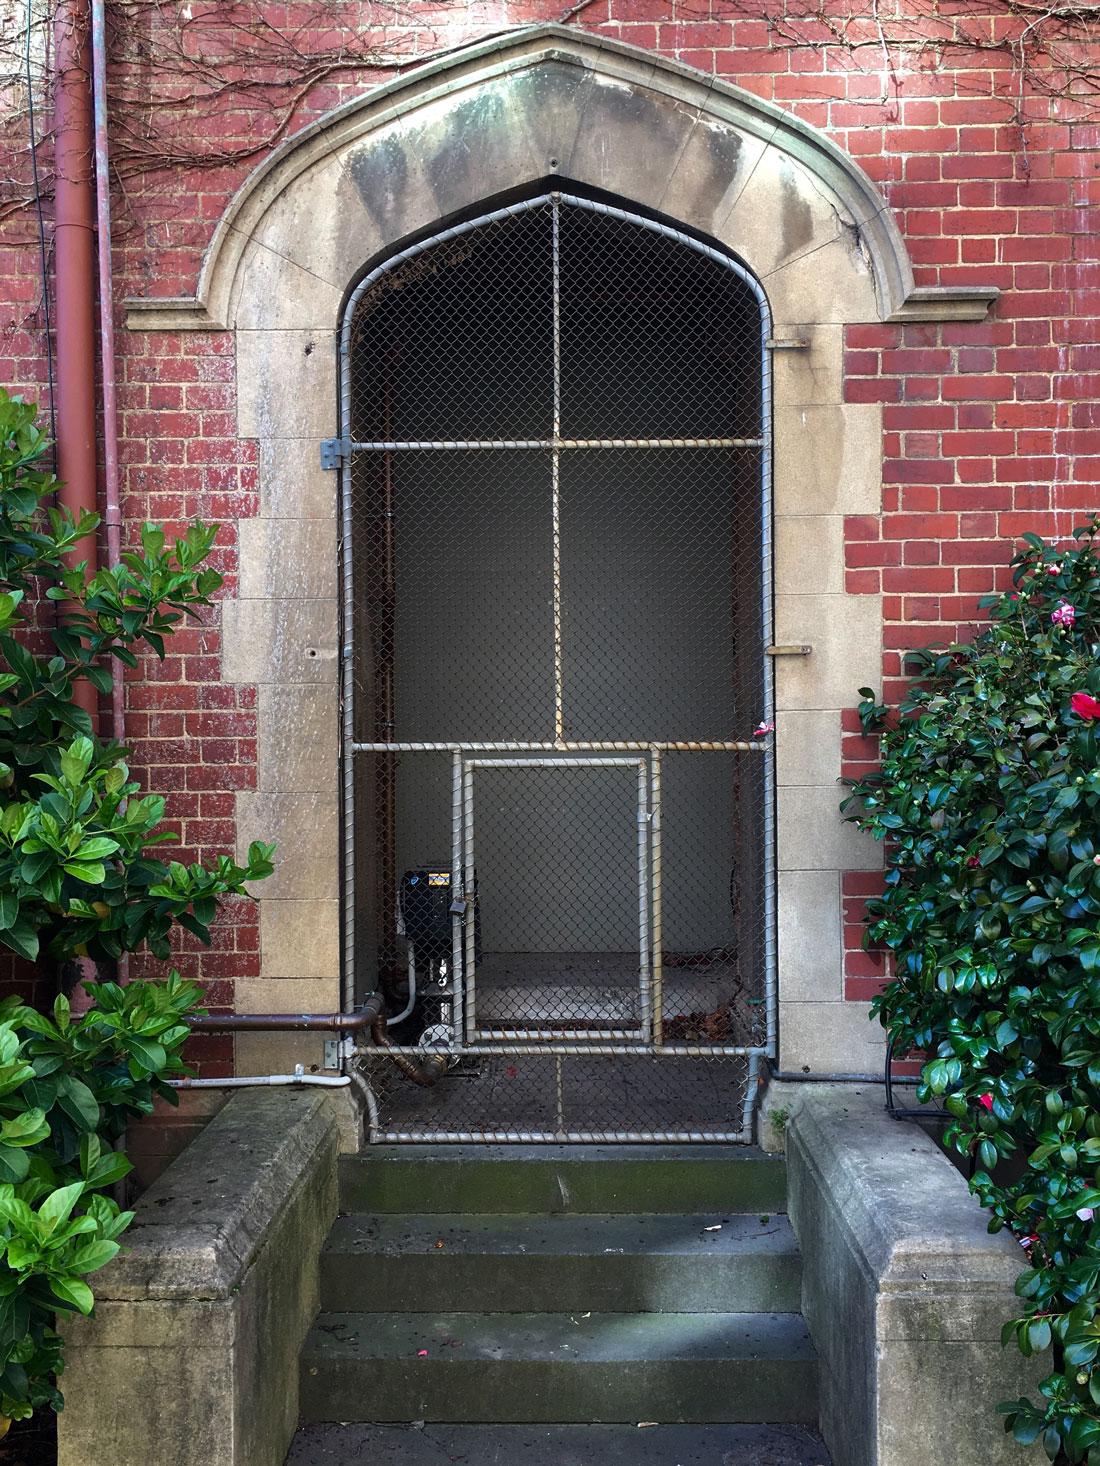 Photo of a brick doorway with stairs leading up. The doorway is fitted with a steel frame and a wire gate.